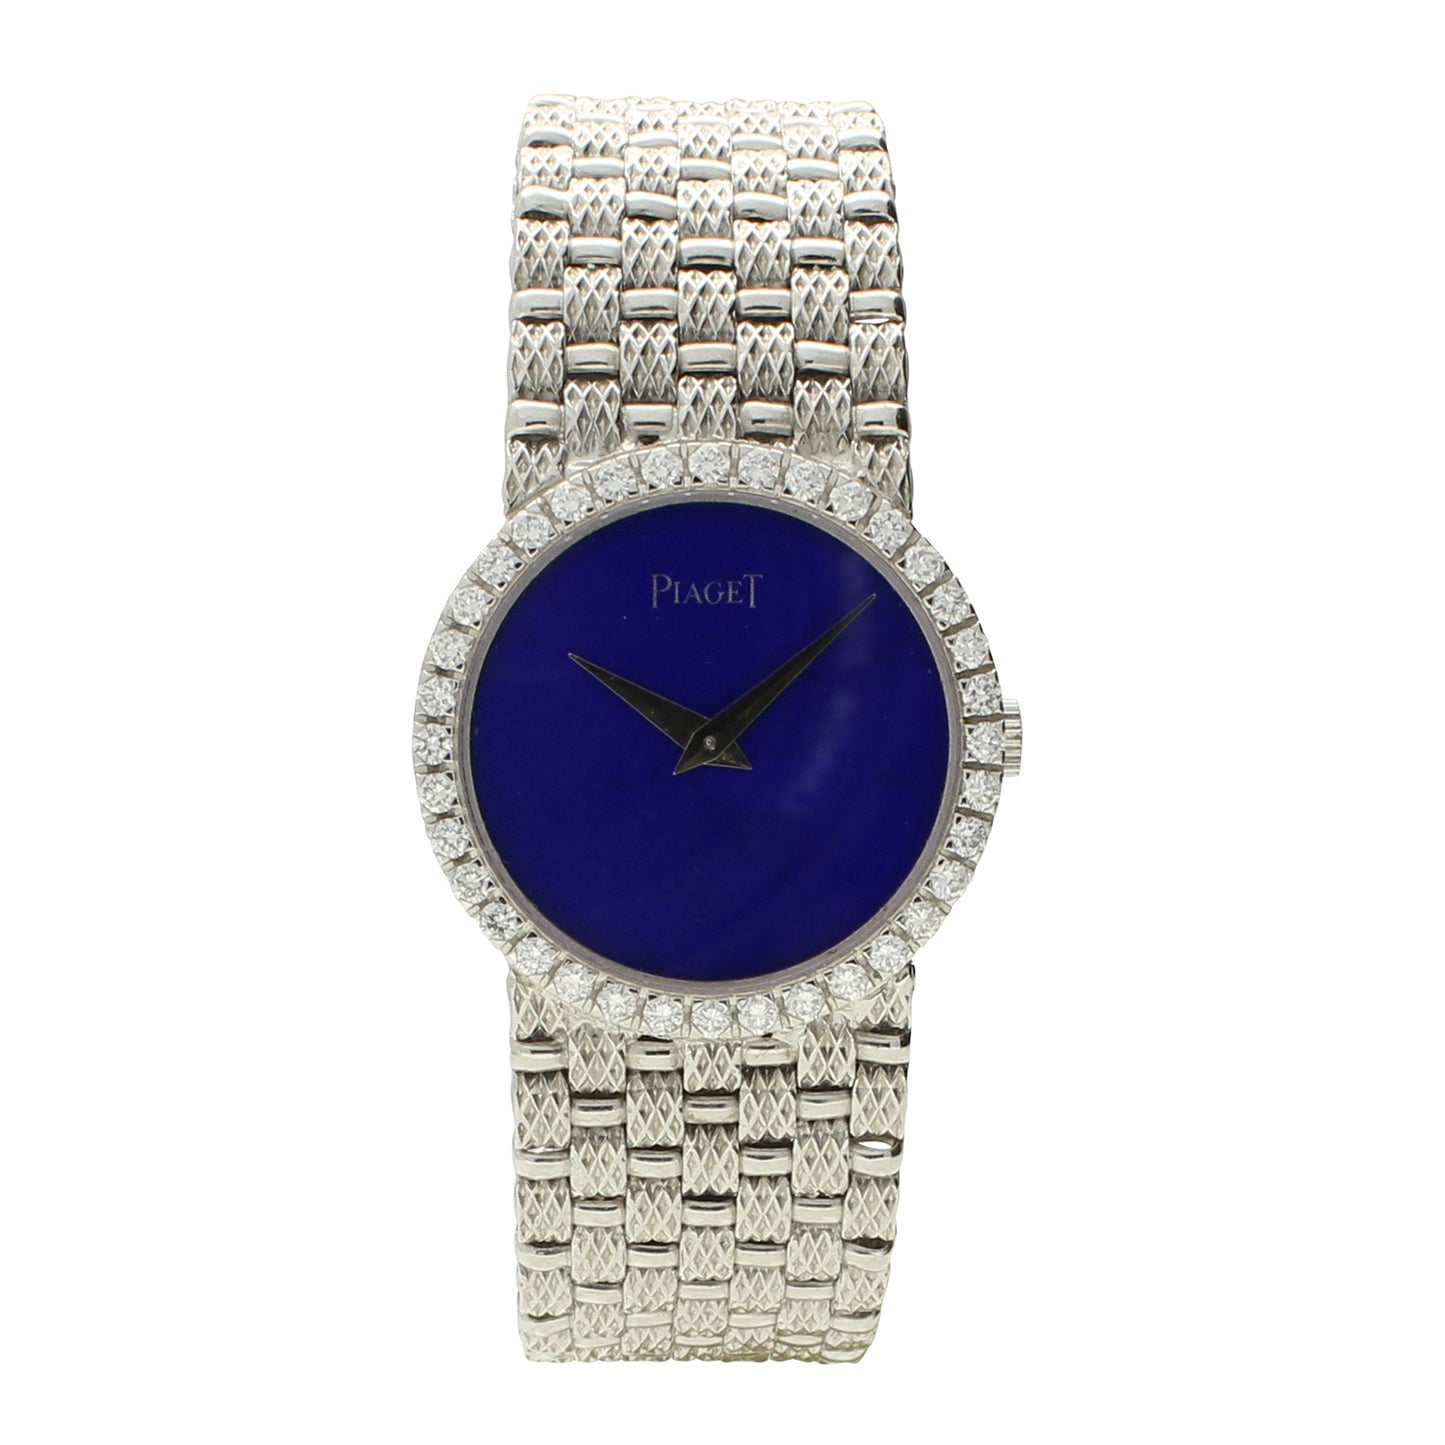 18ct white gold and diamond set bracelet watch with lapis lazuli dial. Made 1970's